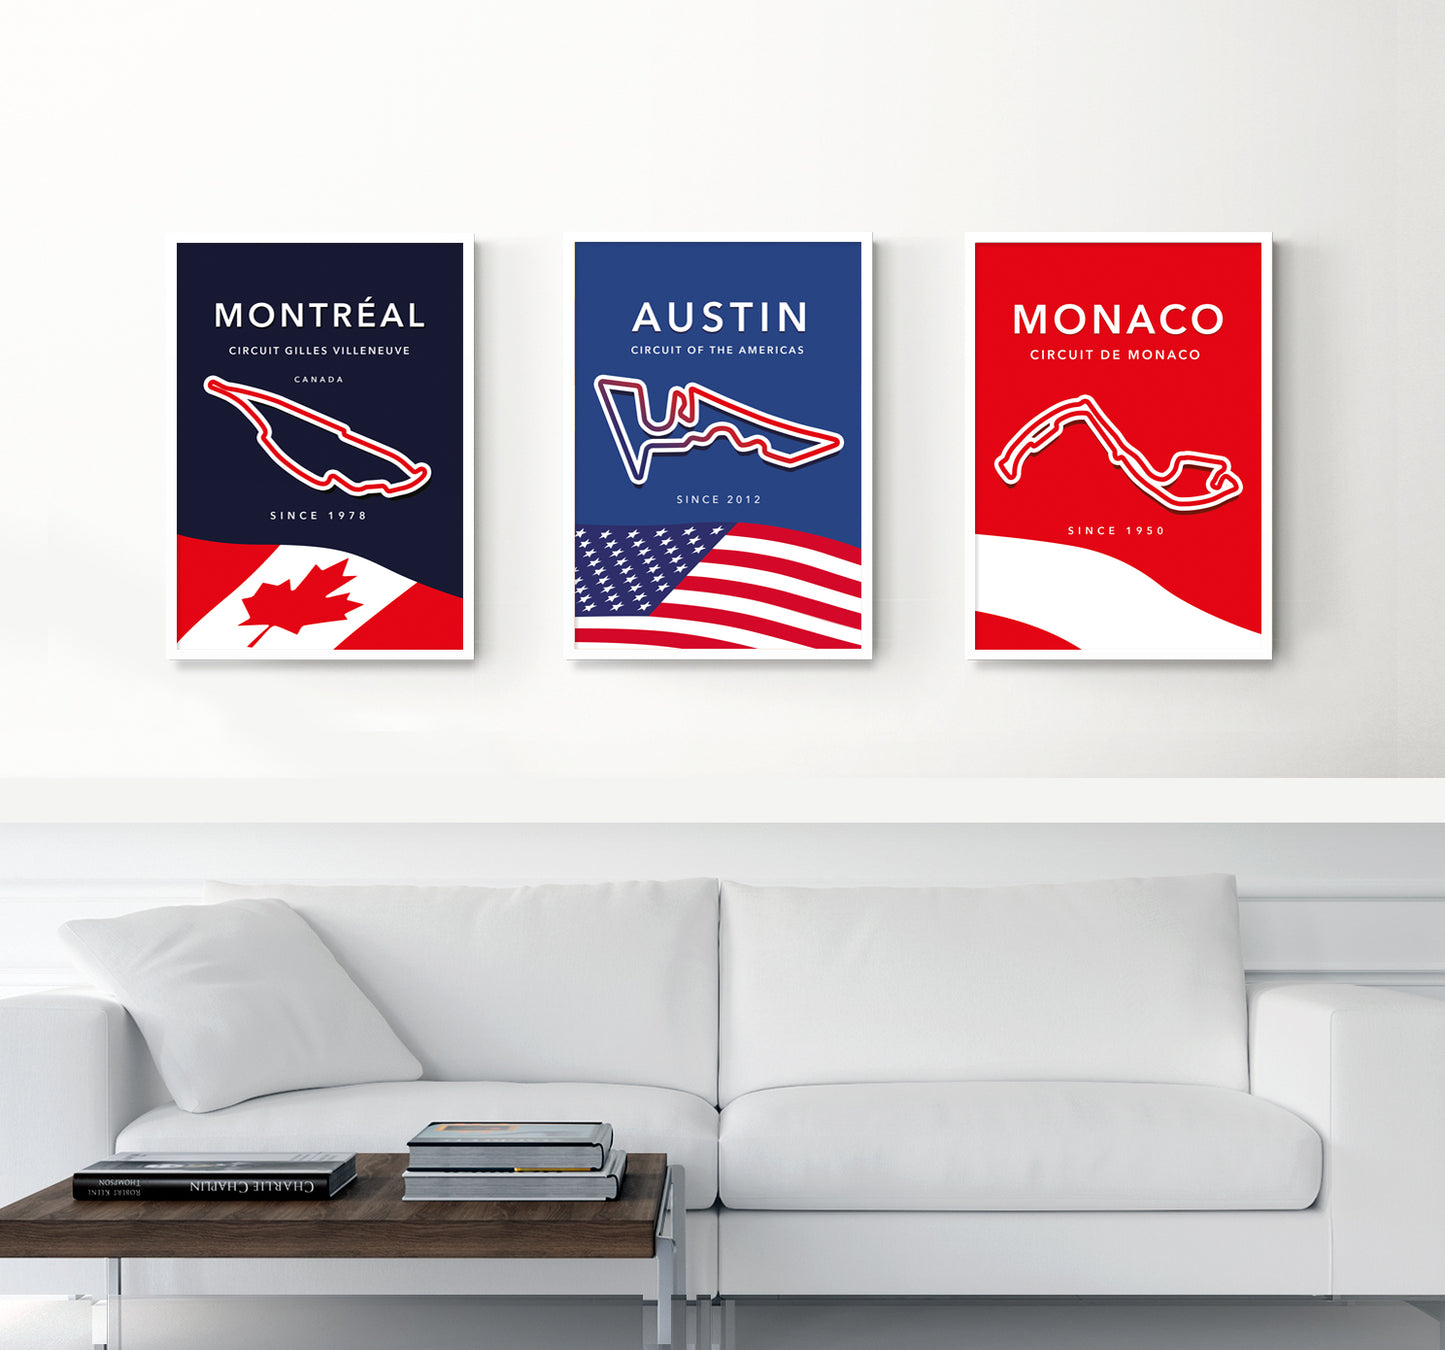 Austin F1 Circuit Poster/Circuit of the Americas/F1 Gift